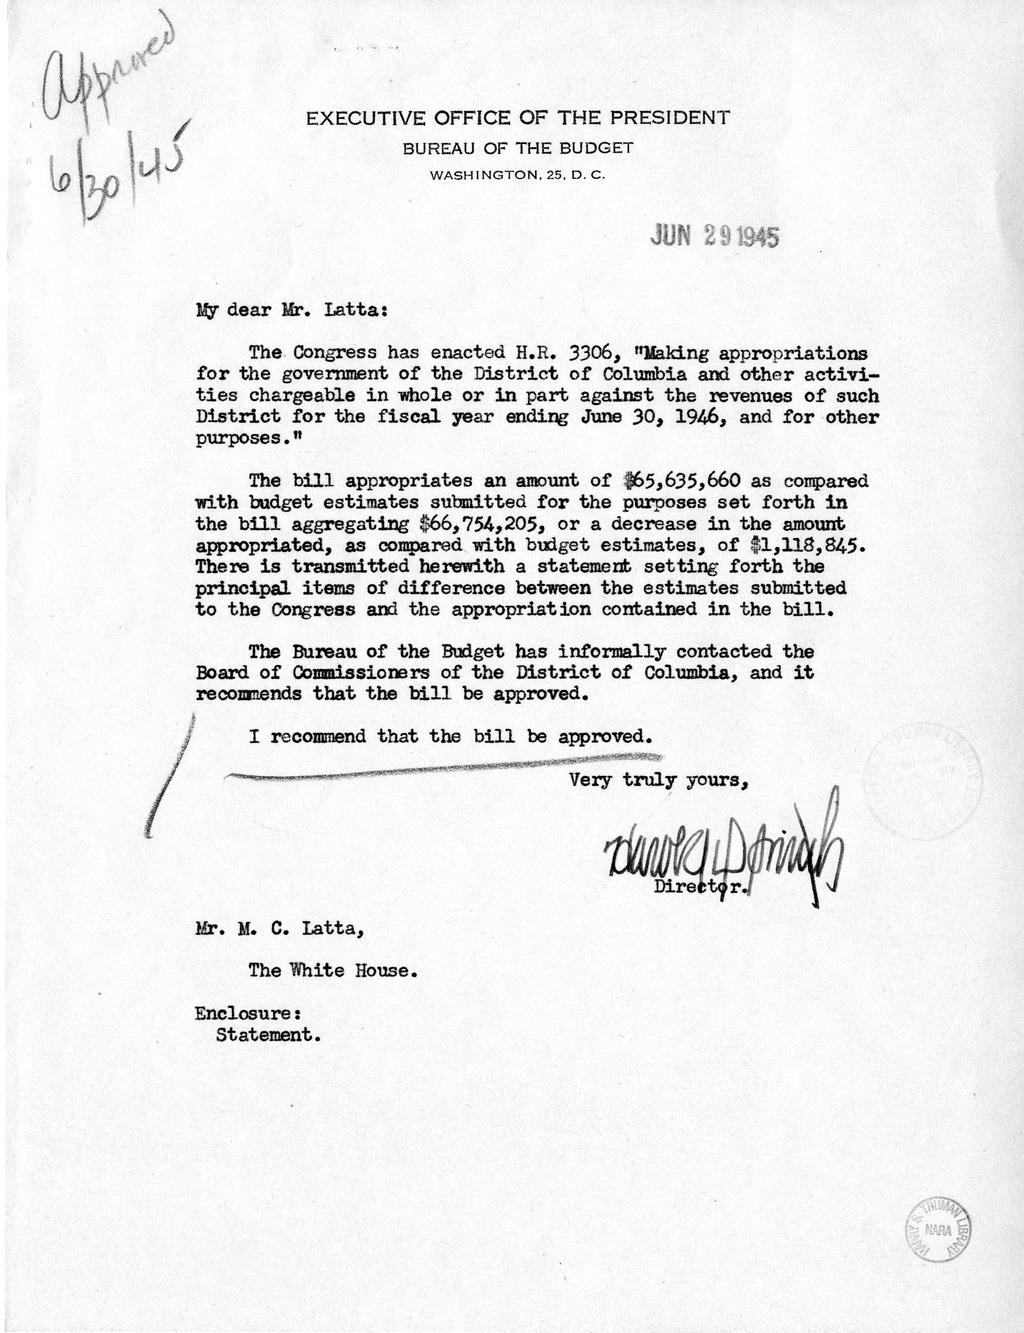 Memorandum from Harold D. Smith to M. C. Latta, H.R. 3306, Making Appropriations for the District of Columbia for the Fiscal Year Ending June 30, 1946, with Attachments